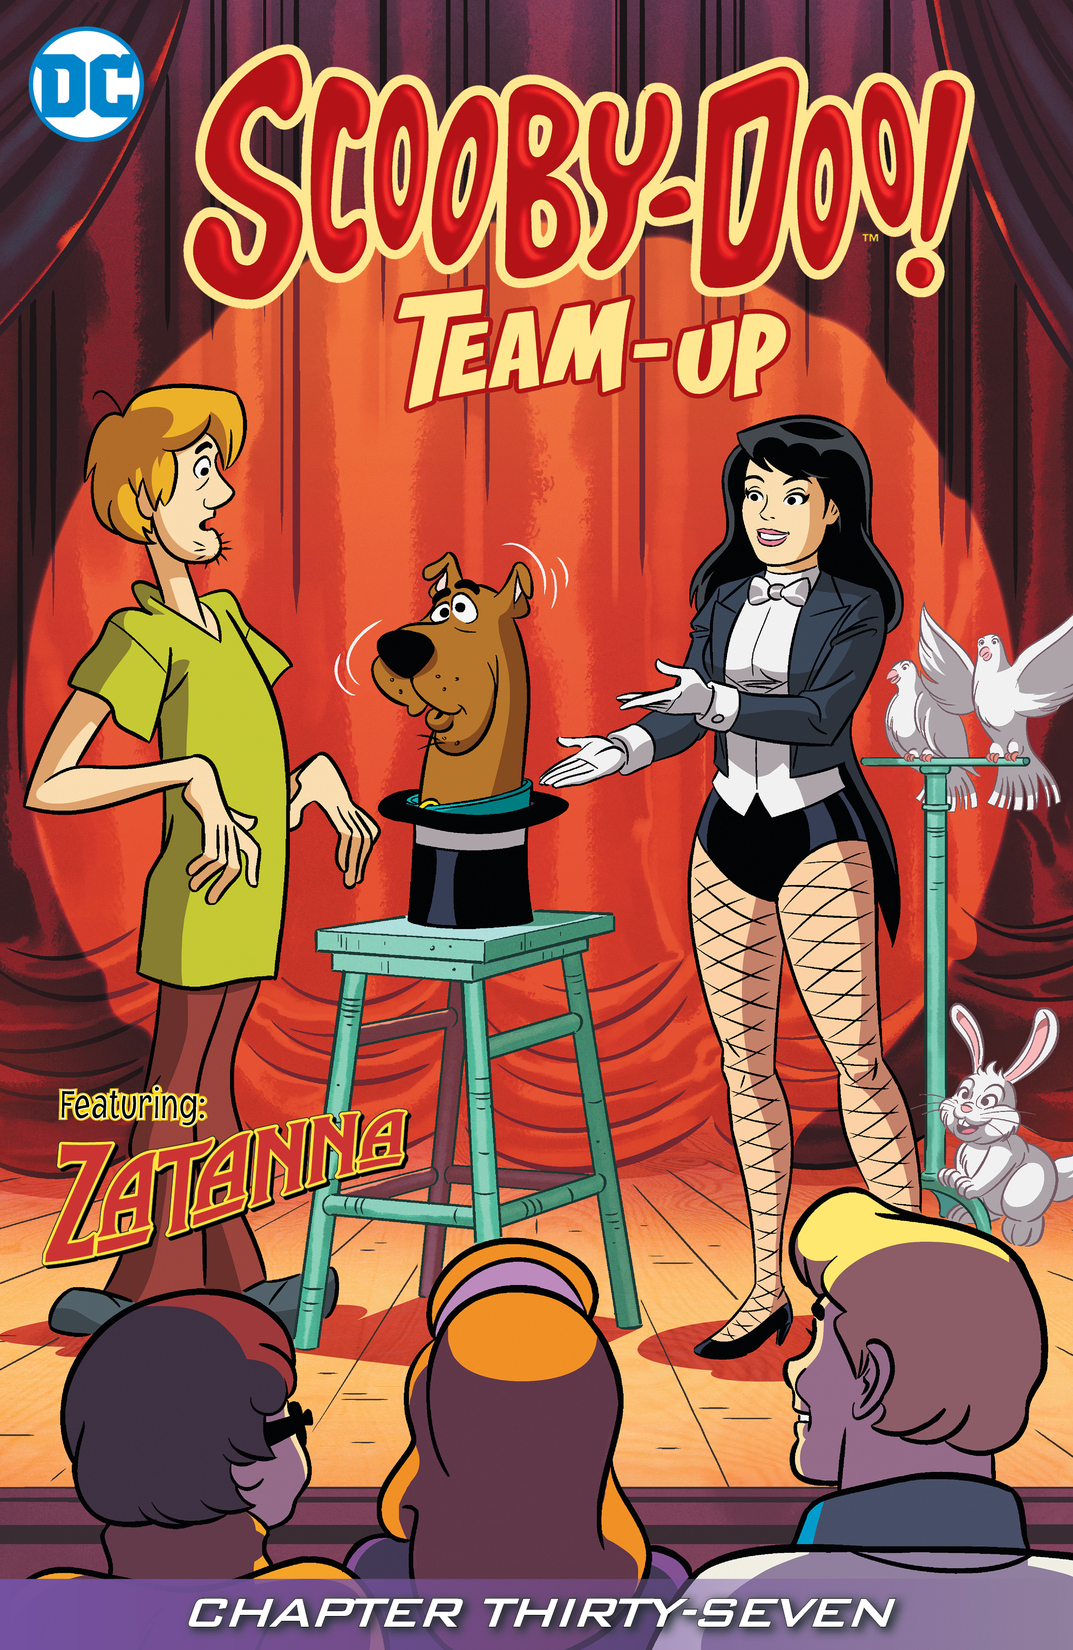 Scooby-Doo Team-Up #37 preview images